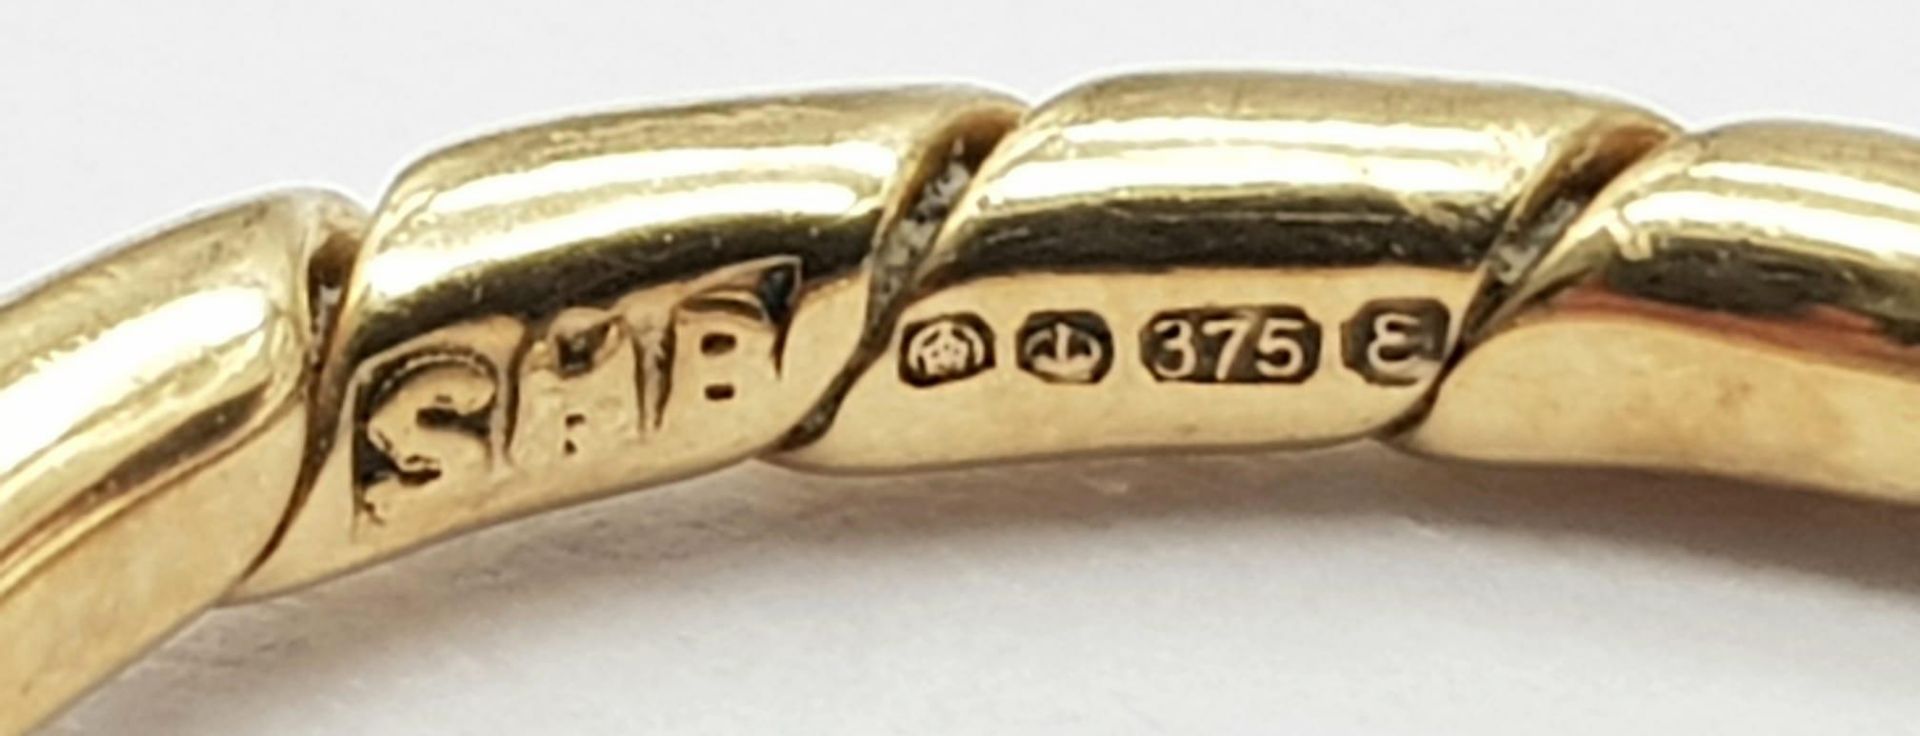 A Vintage 9K Yellow Gold Thin Band Ring with Diagonal Ridged Design. Size K. 1.33g. 2mm - Image 4 of 4